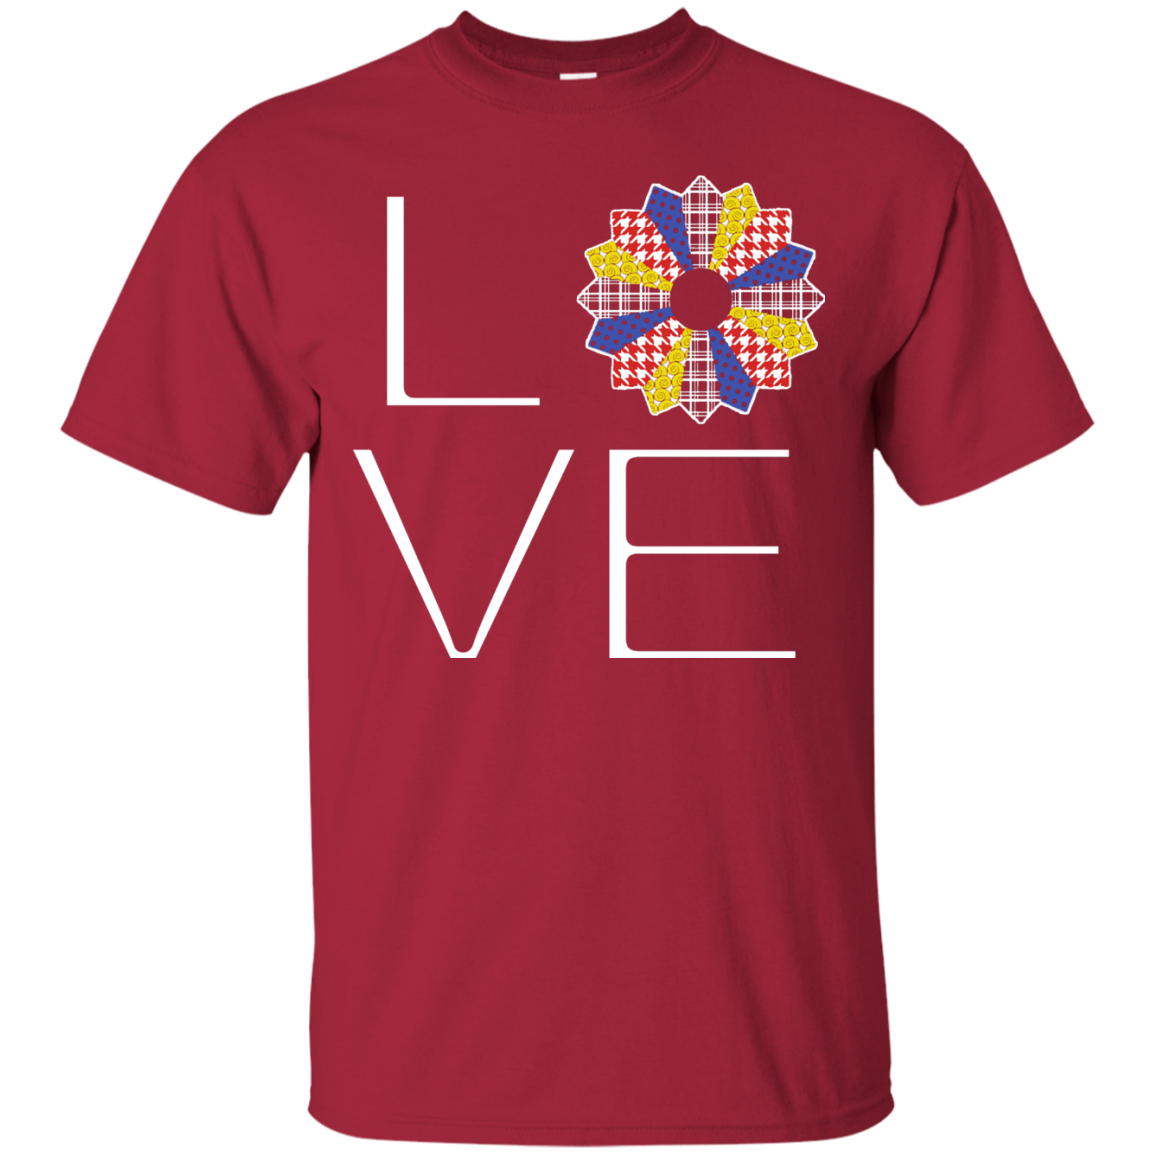 LOVE Quilting (Primary Colors) Custom Ultra Cotton T-Shirt - Crafter4Life - 3